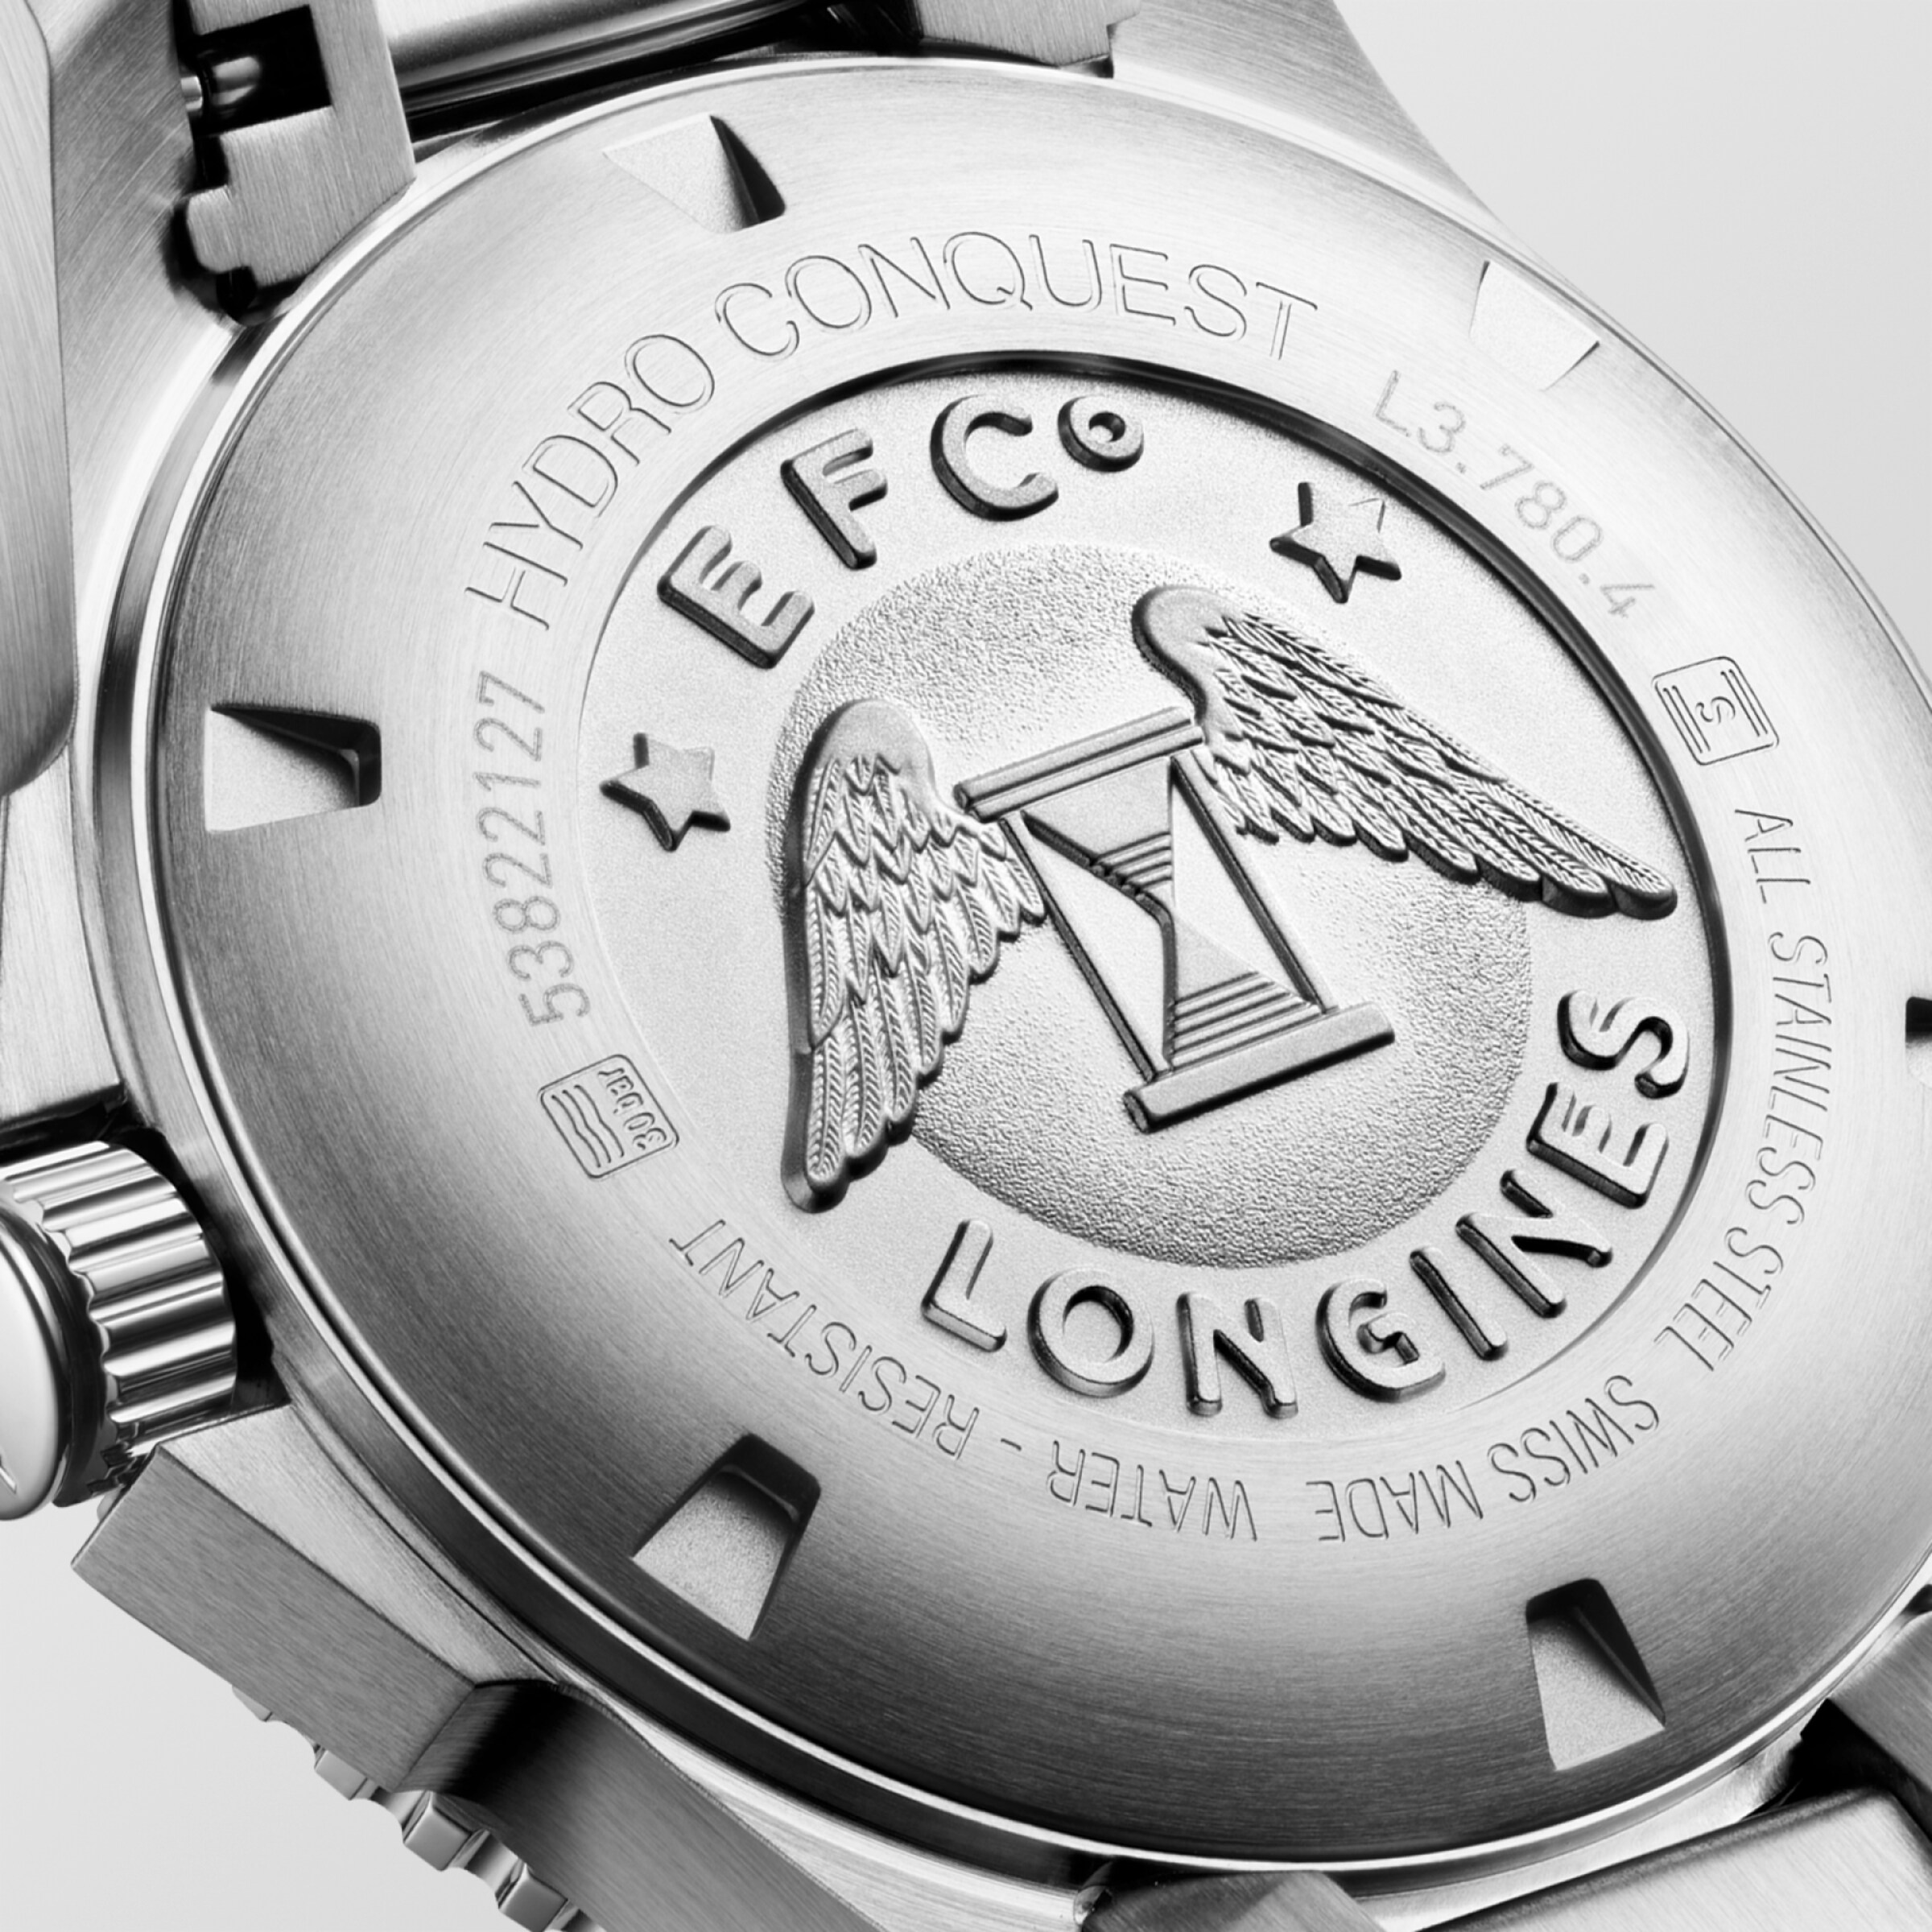 Longines HYDROCONQUEST Automatic Stainless steel and ceramic bezel Watch - L3.780.4.56.6